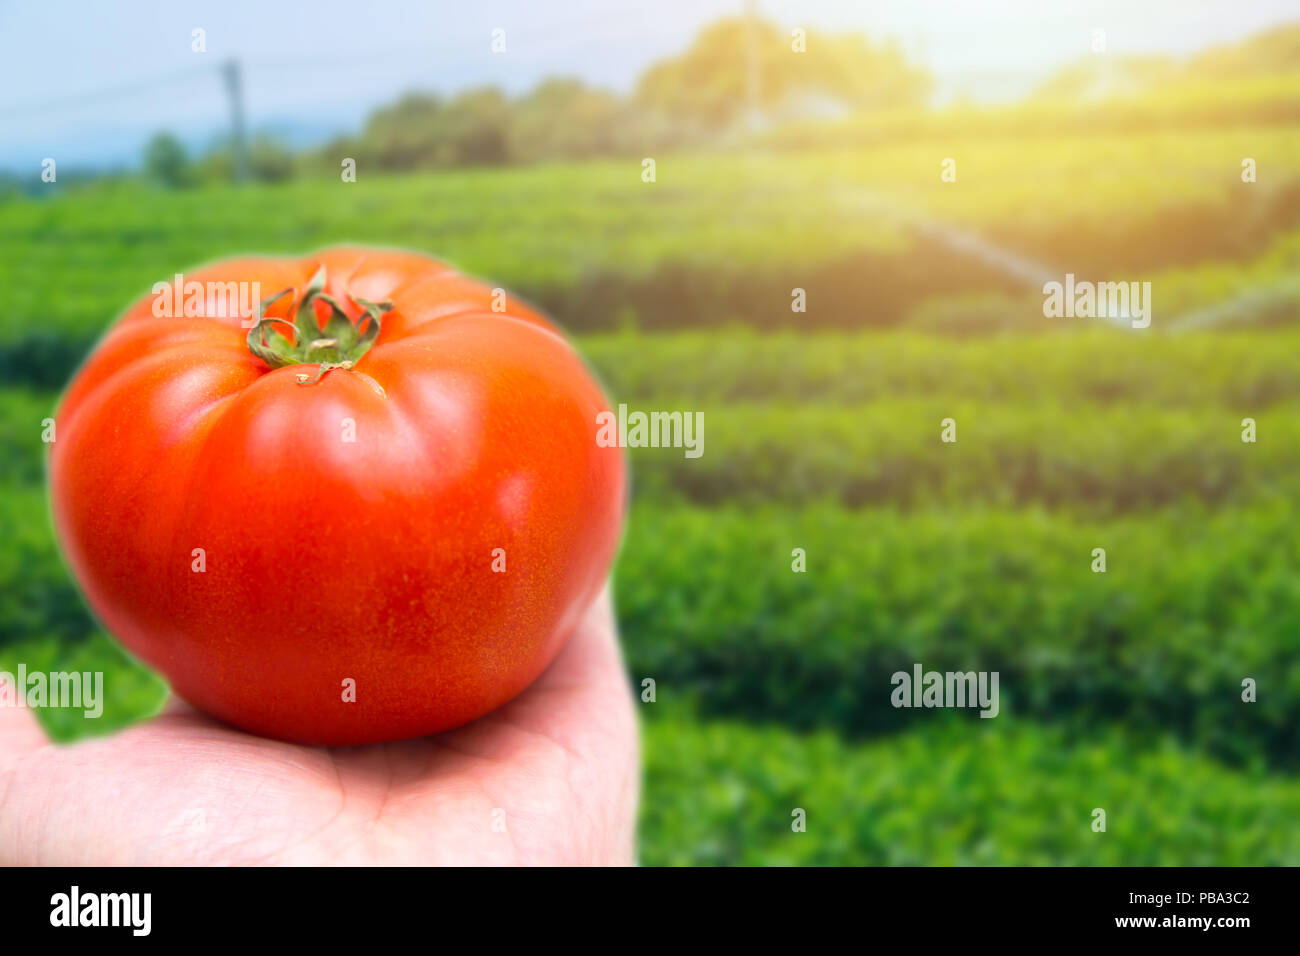 Tomato with tomato plant field agriculture farm background Stock Photo